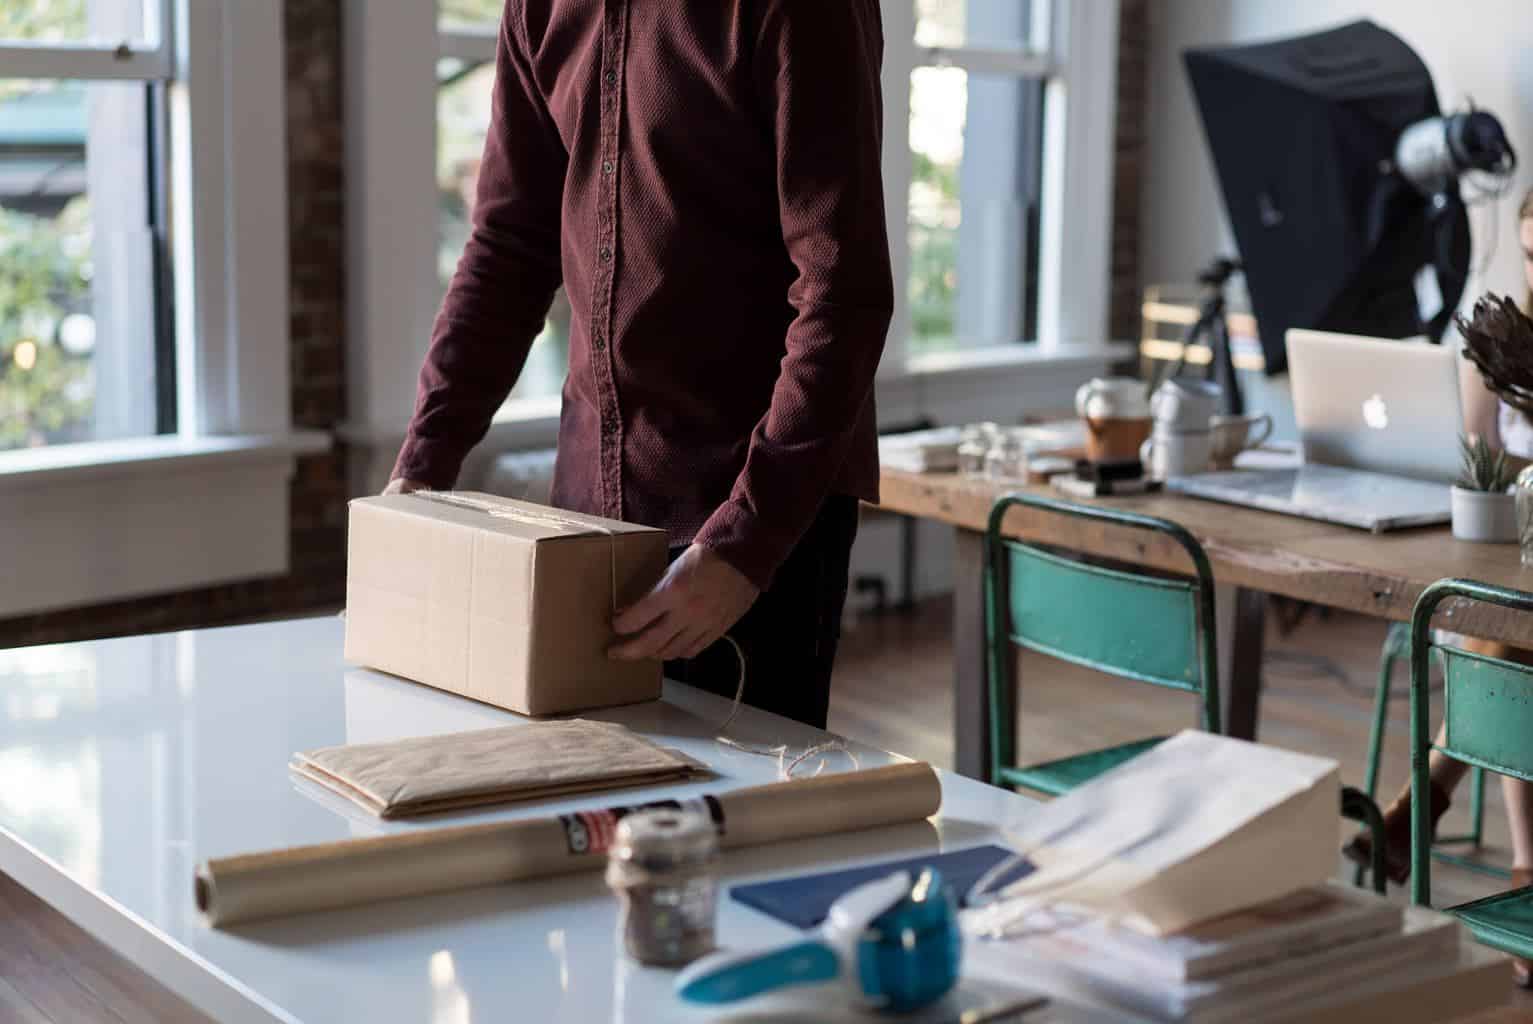 4 Shipping Options for Your Ecommerce Business